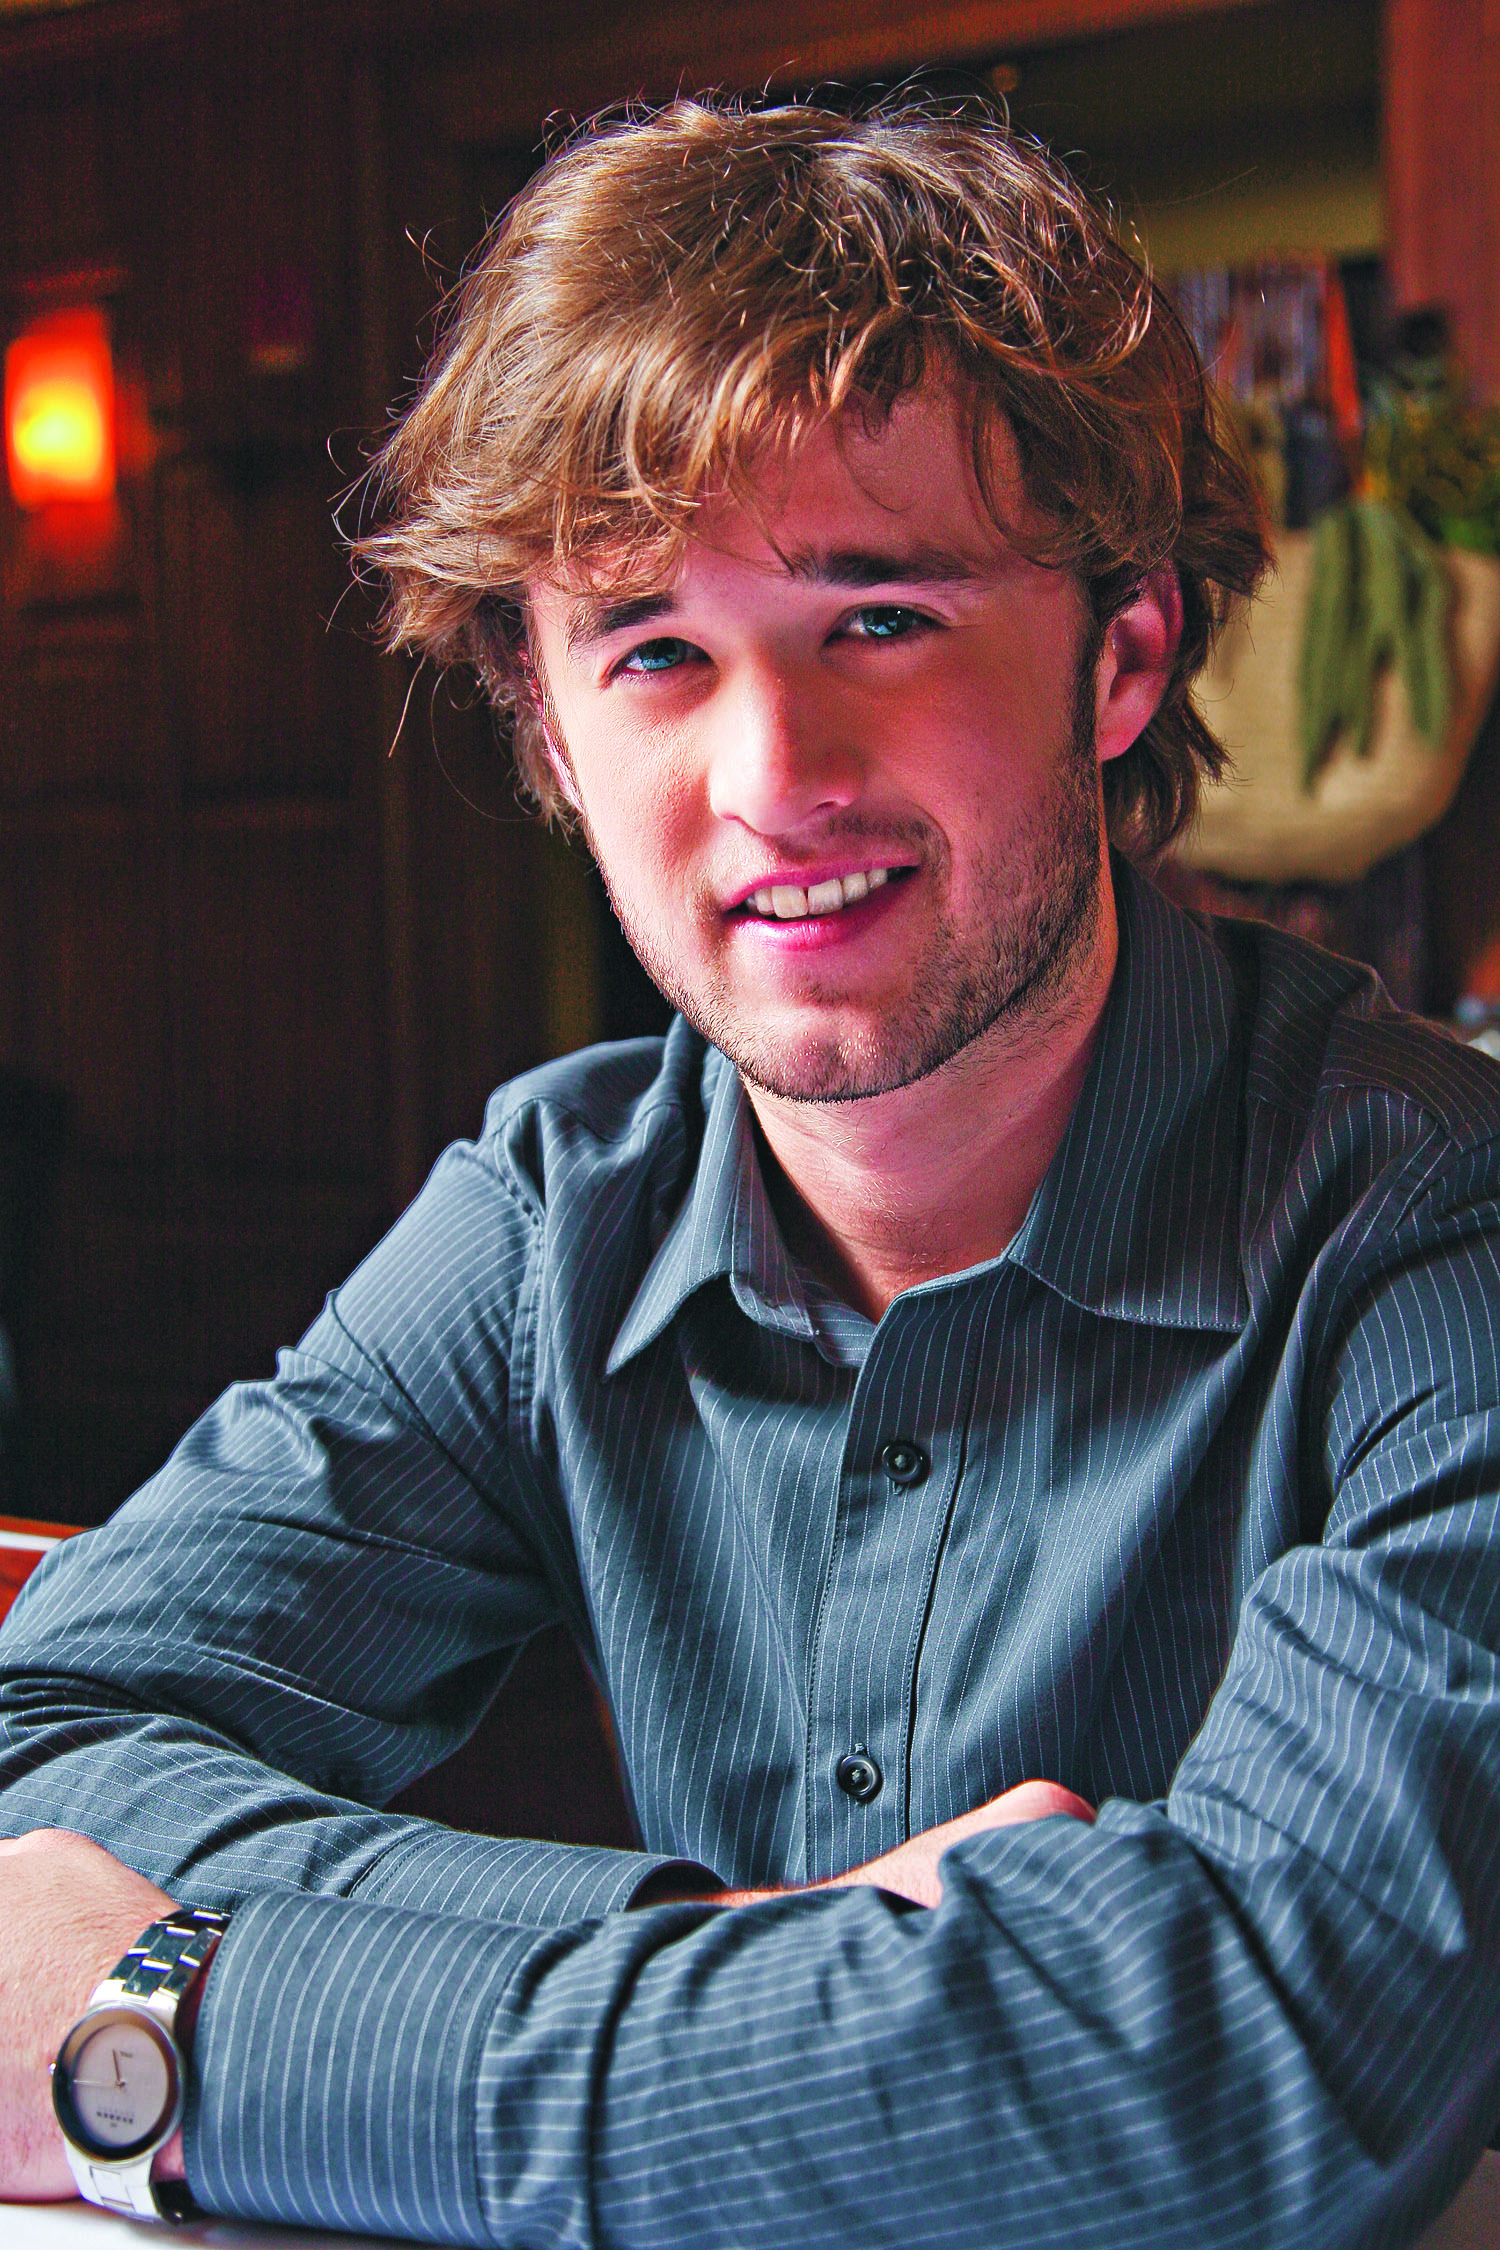 Haley Osment photographed on November 6, 2008 | Source: Getty Images